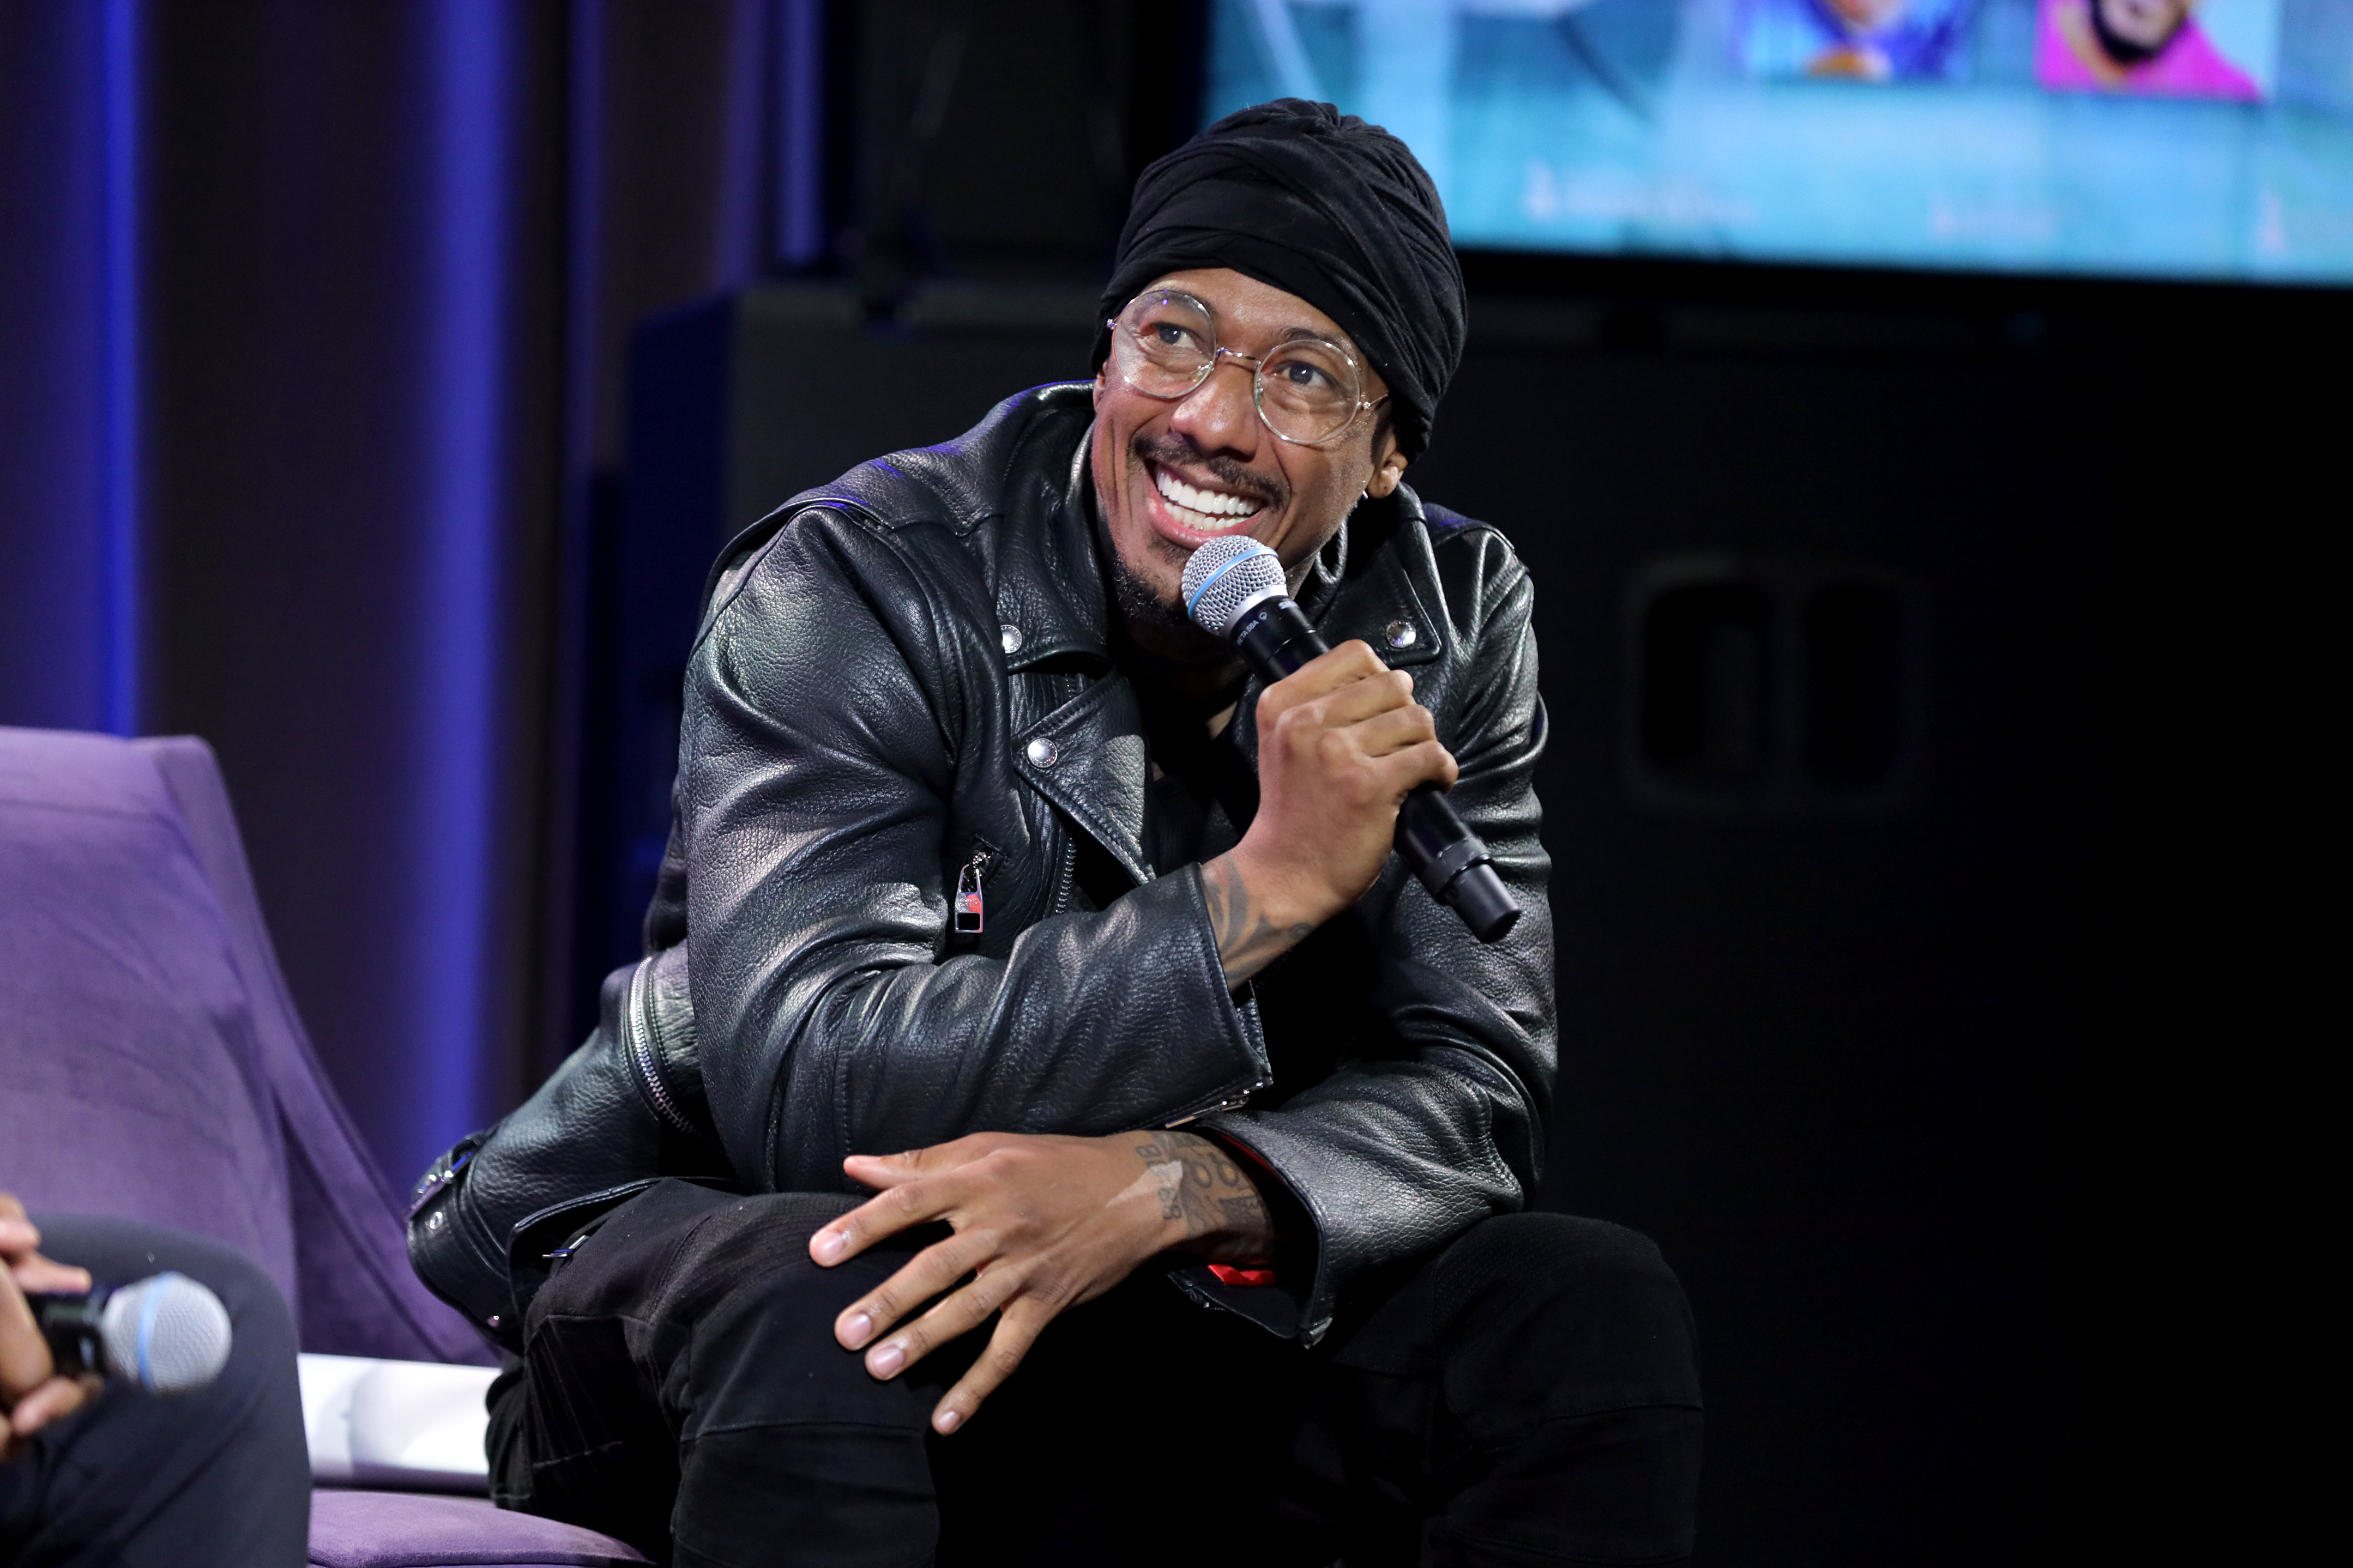 Nick Cannon at Hip Hop & Mental Health Event at The GRAMMY Museum, Los Angeles, June 25, 2022 | Source: Getty Images